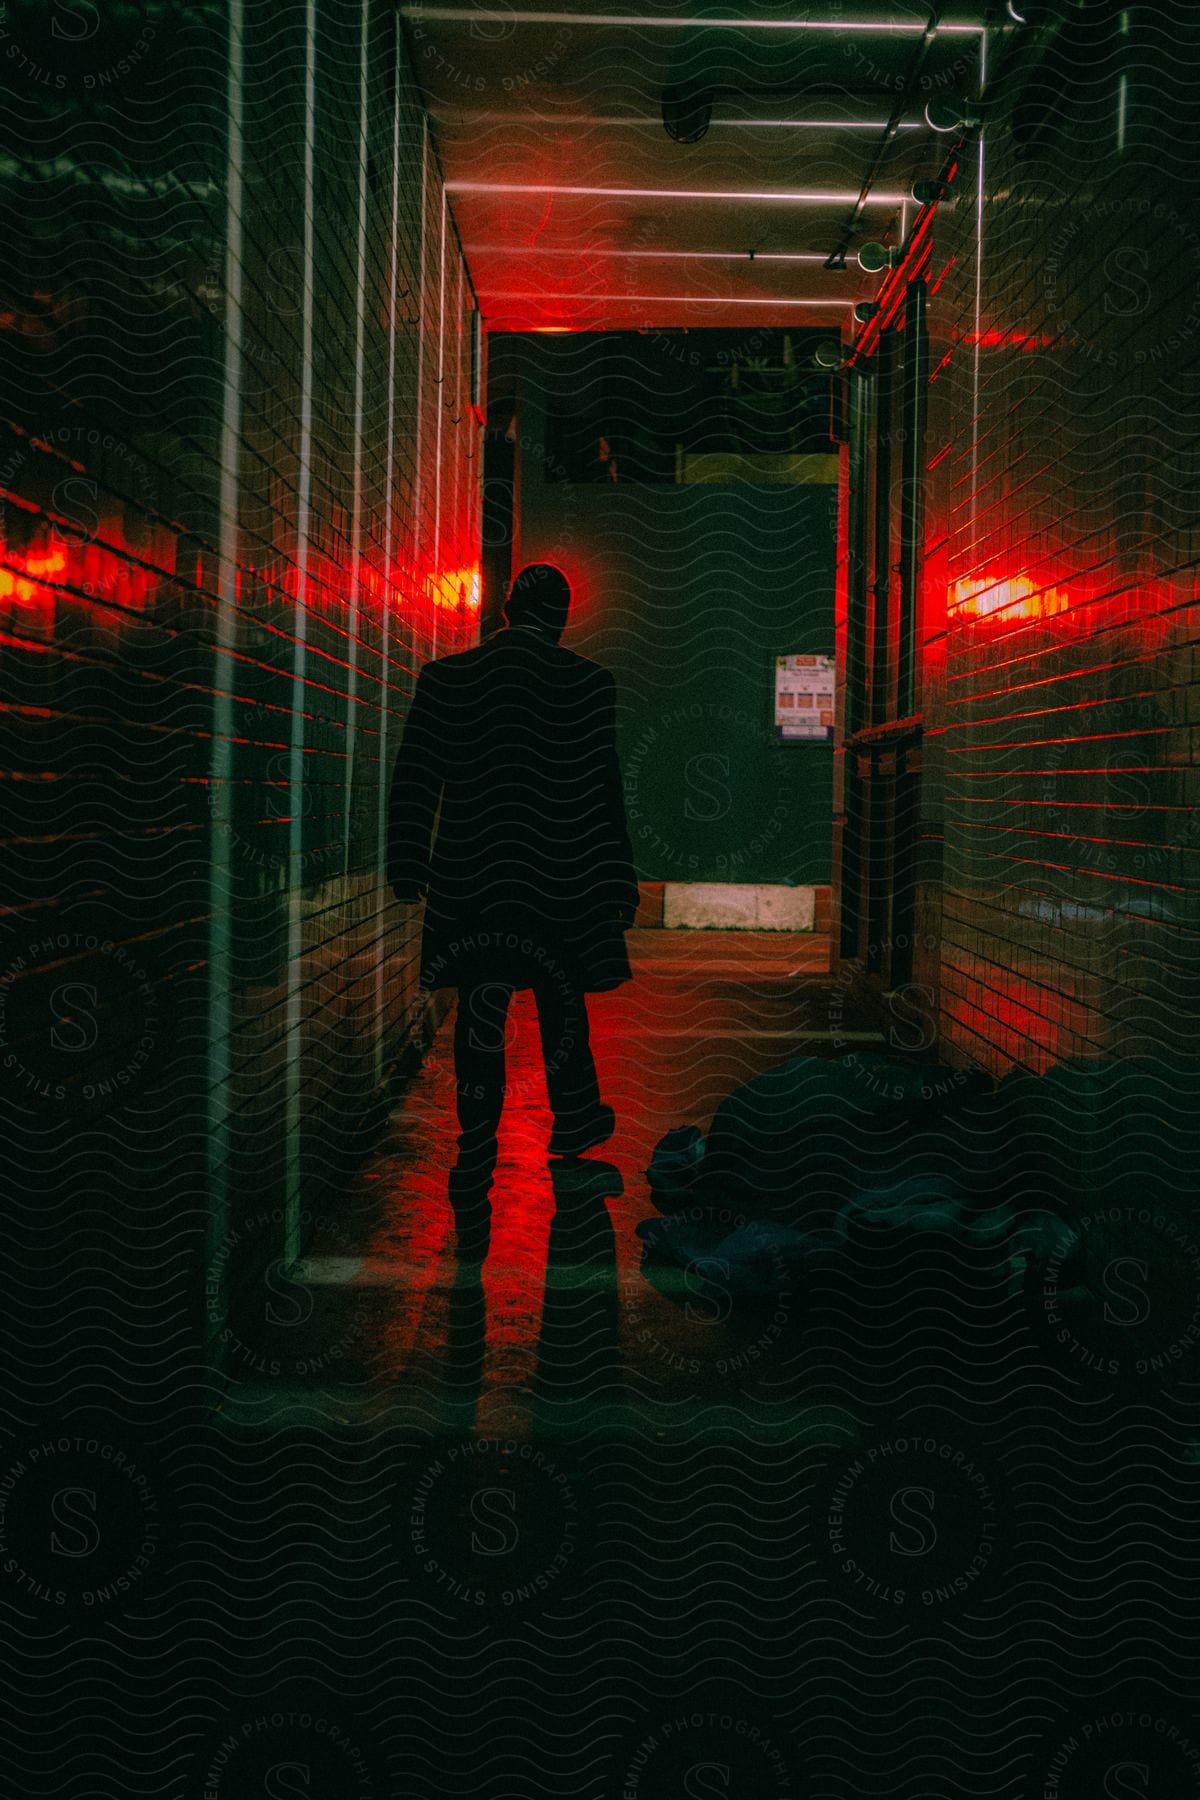 A dark hallway lit by red lights shows a man in a suit walking past trash.